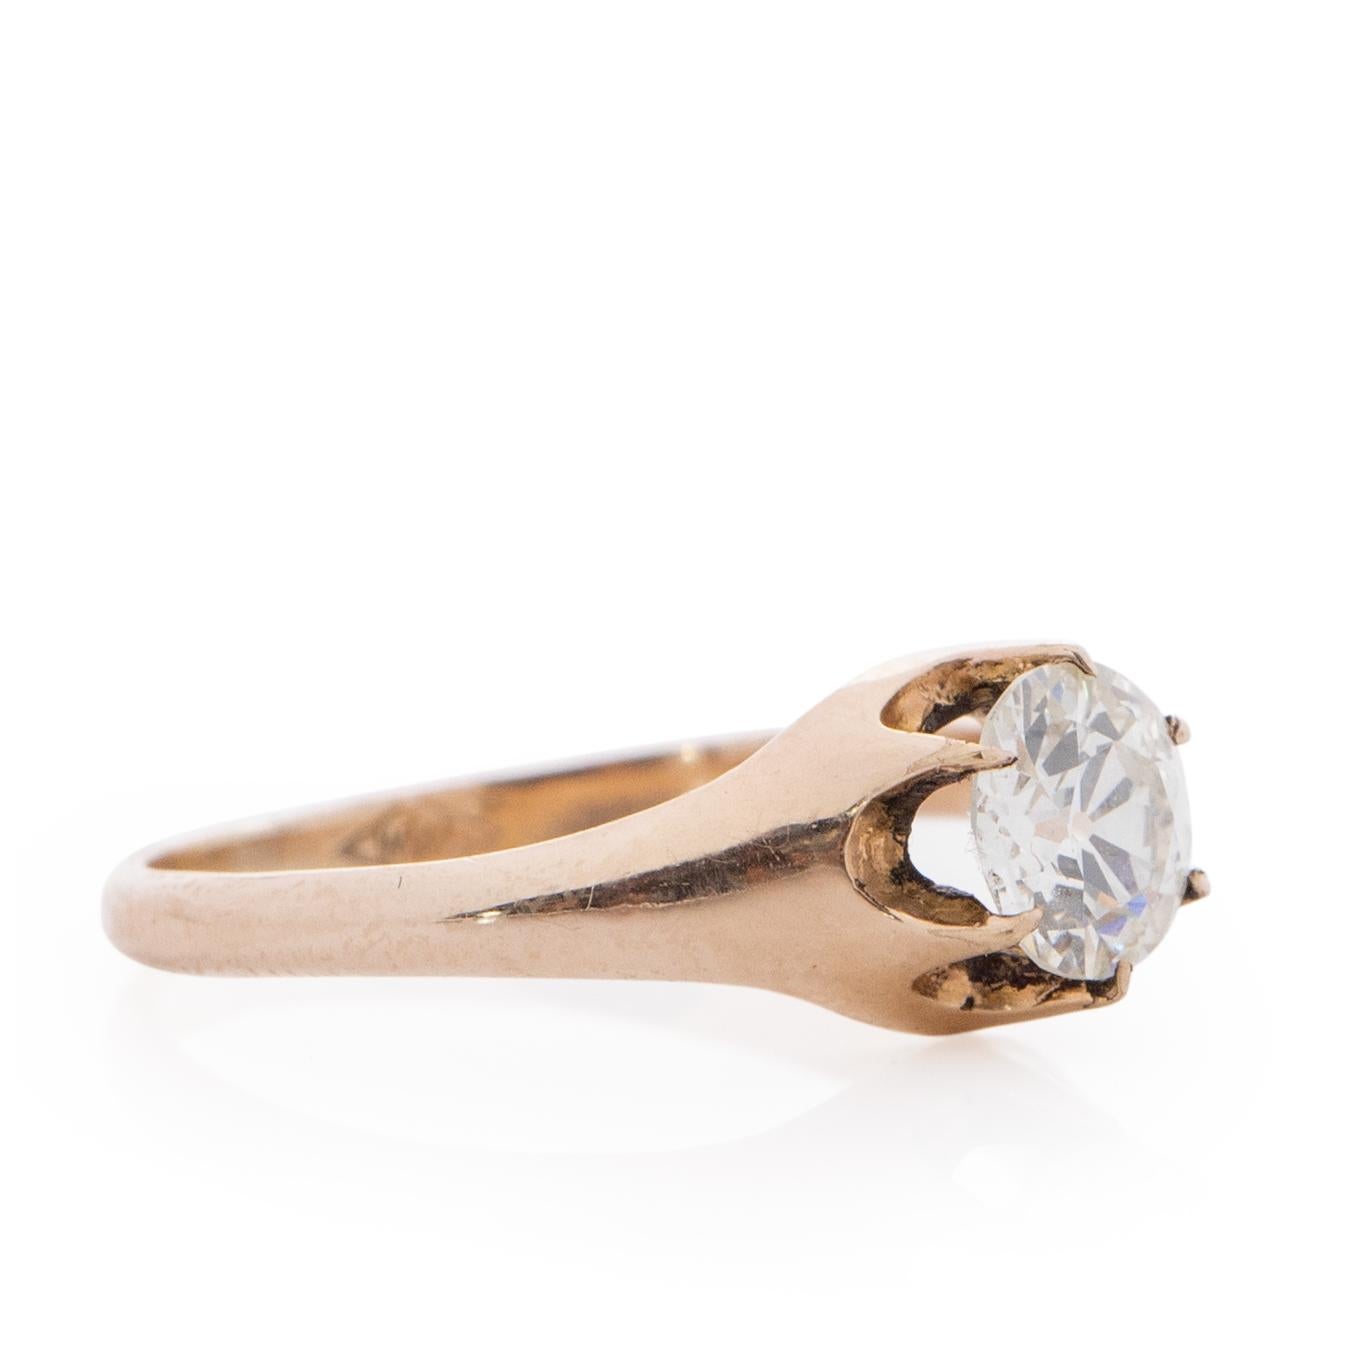 Here we have a beautiful Victorian ring that was inspired by the classic belcher style. The beautiful .90ct SI1 diamond is held in by 6 prongs, the K yellow gold mount has a smooth finish adding to its elegance but not taking away from the breath